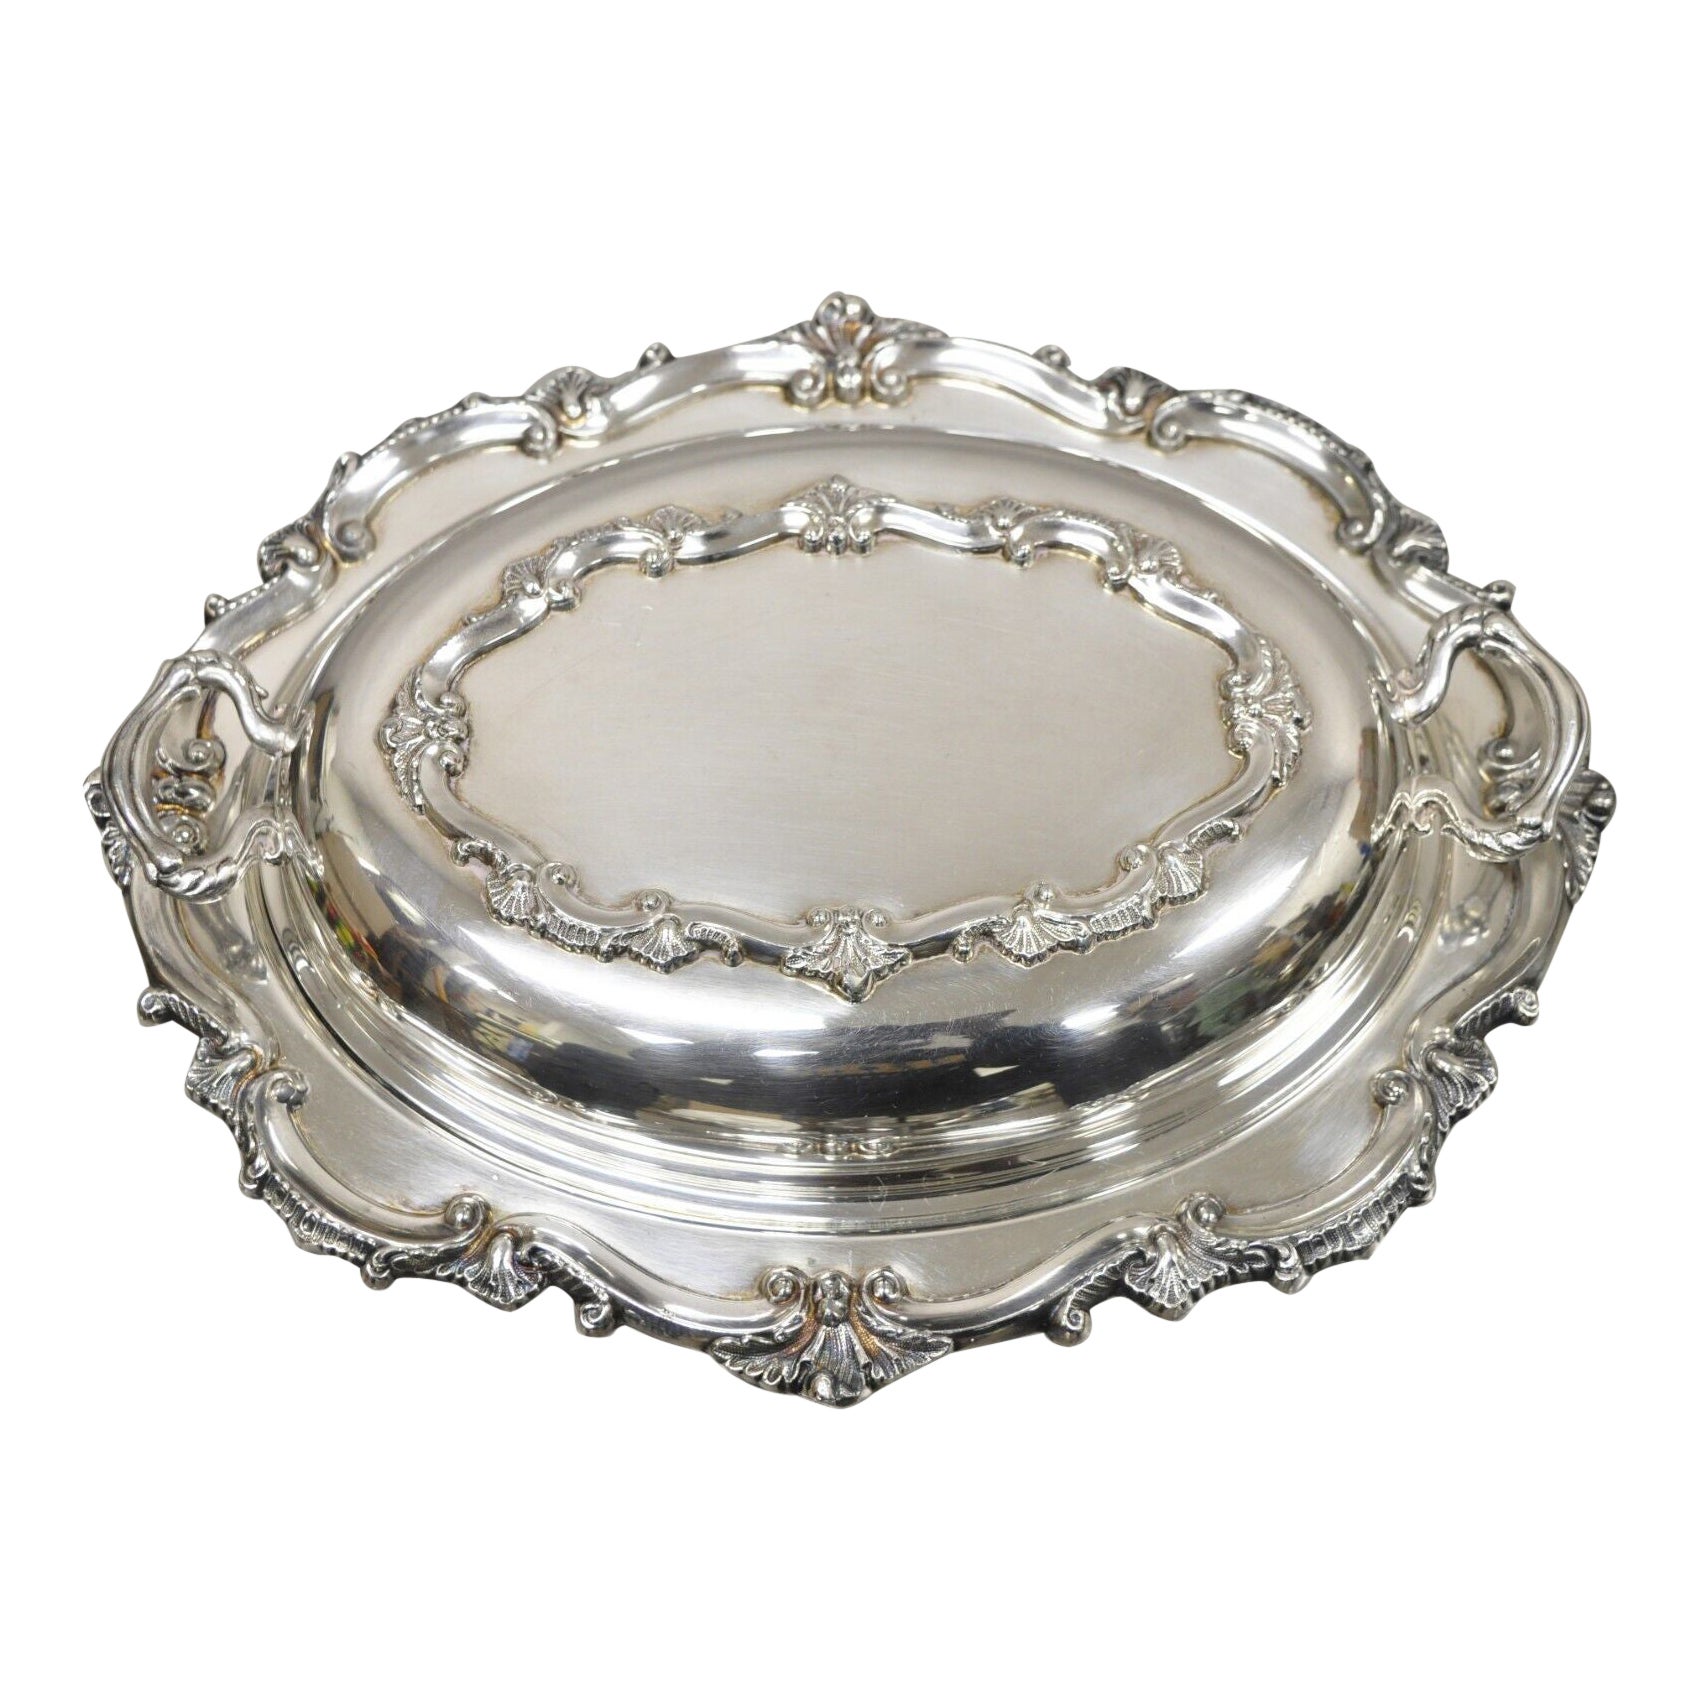 Victorian Style Silver Plated Lidded Ornate Serving Dish Bristol Silver by Poole For Sale